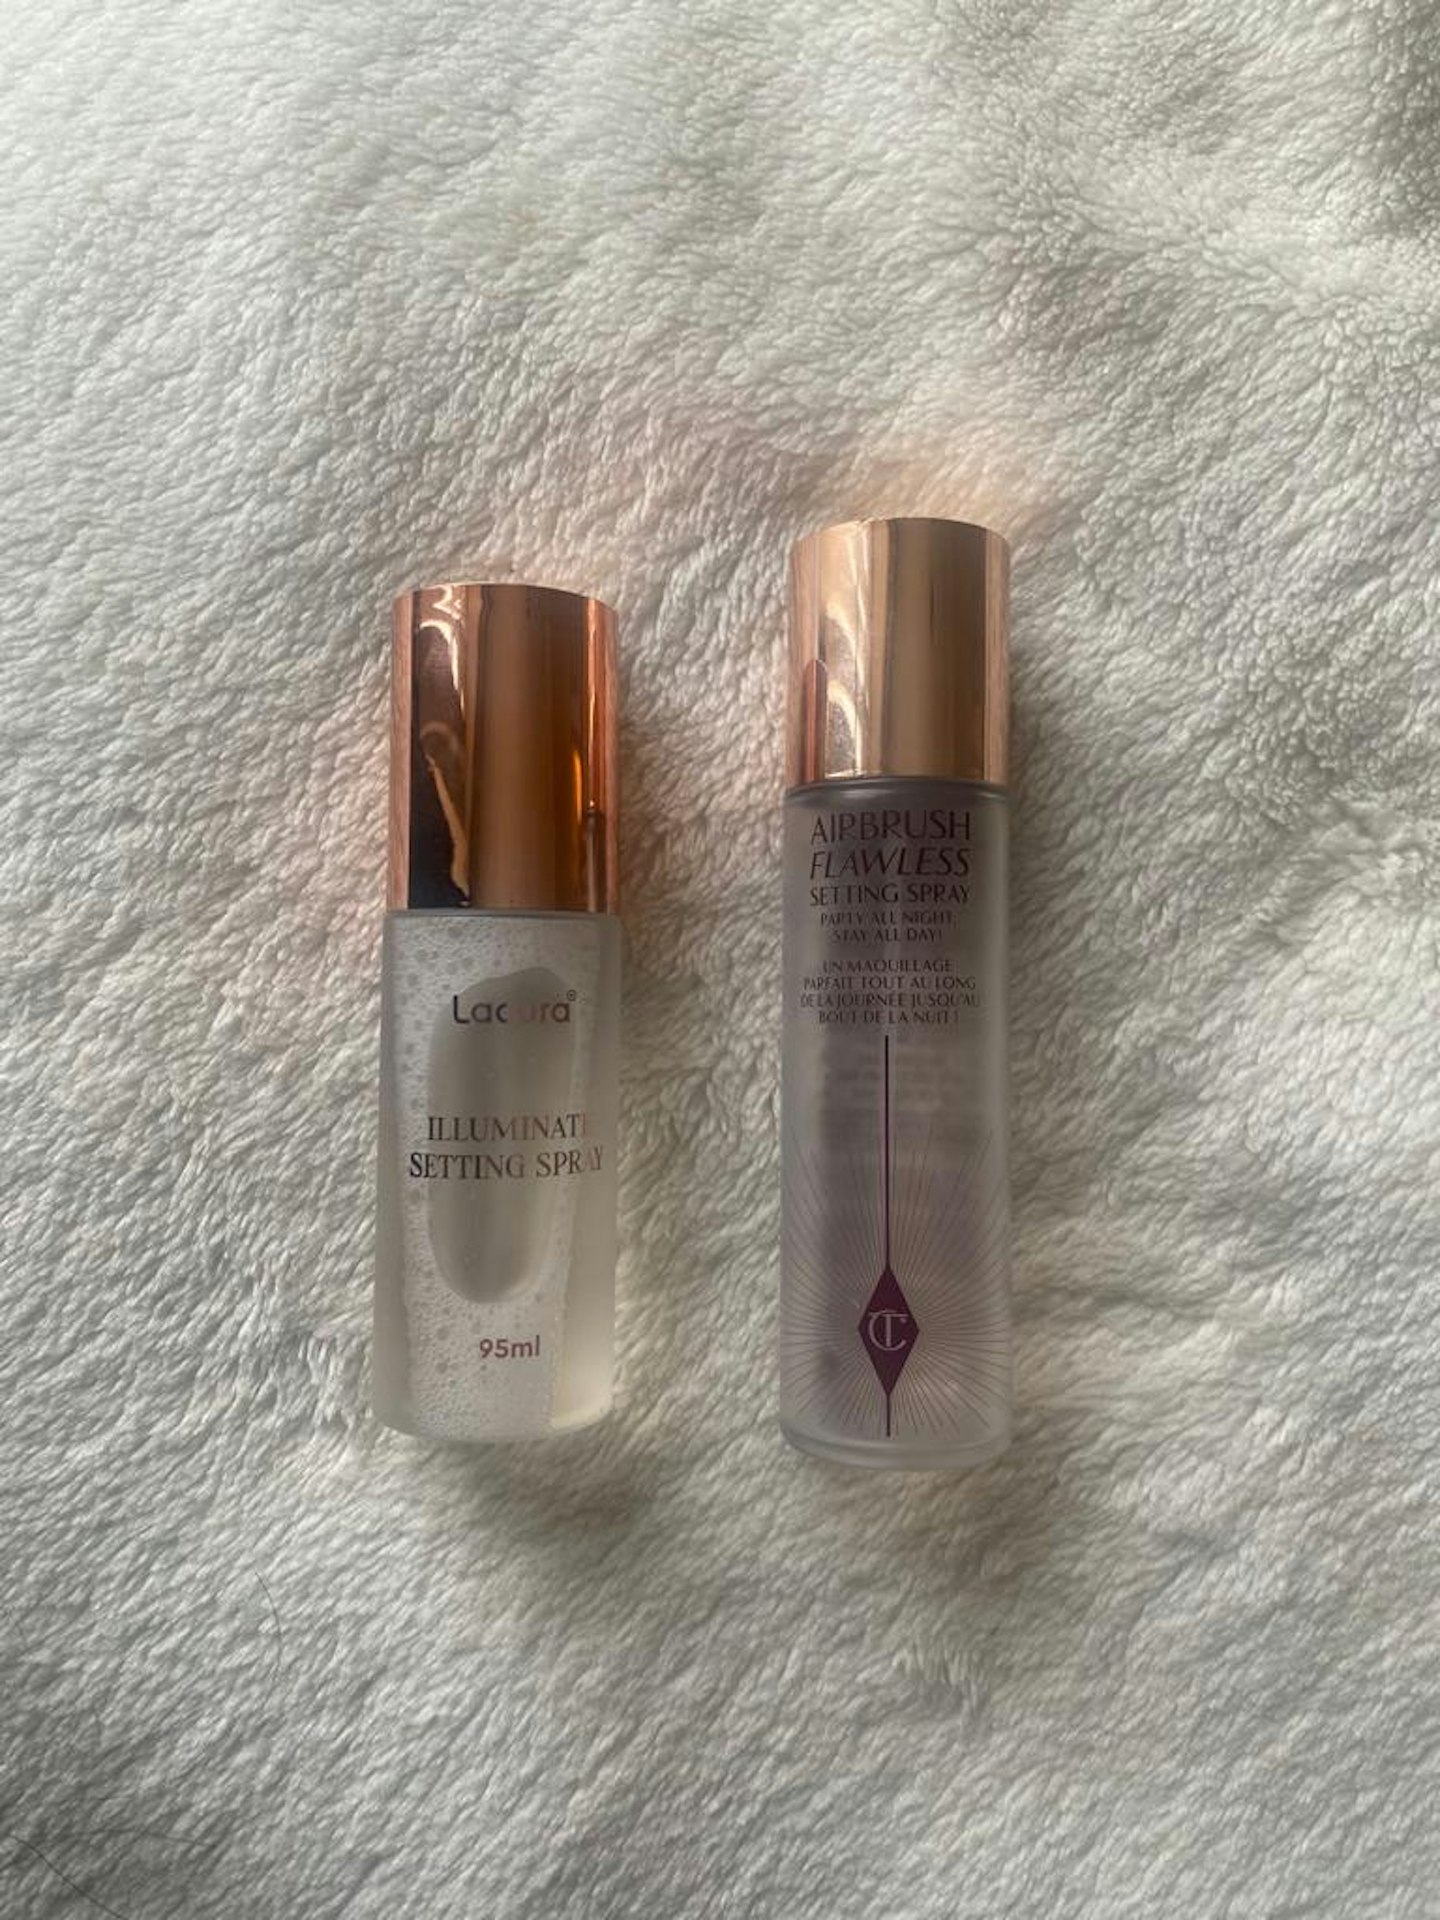 Meet The £4.49 Dupe For Charlotte Tilbury's Airbrush Flawless Setting Spray